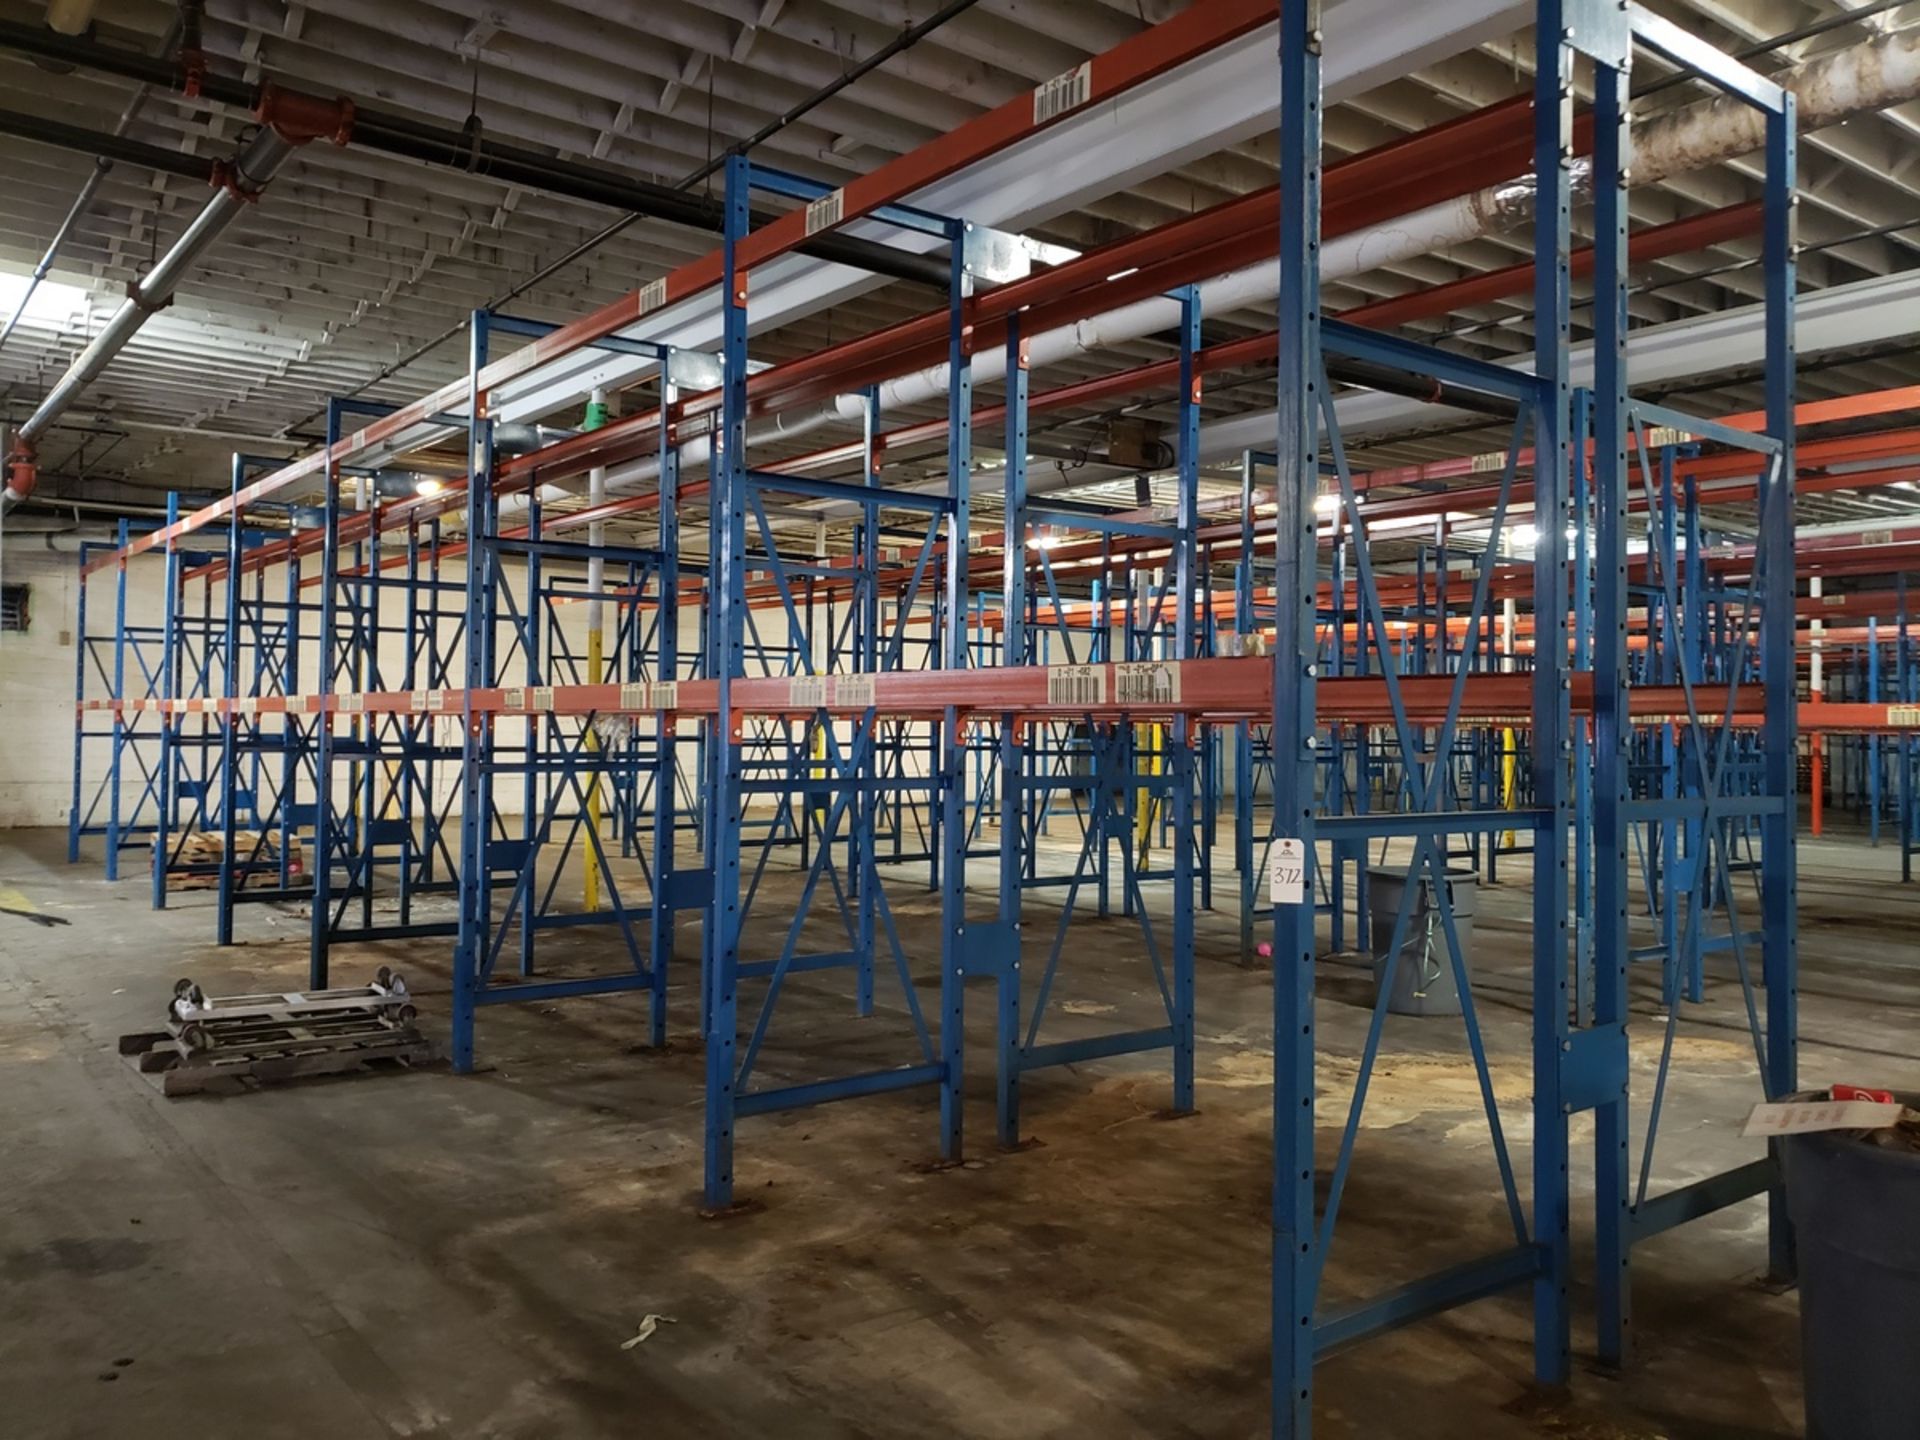 Lot of Pallet Racking, (16) 42" x 12' Uprights, (52) 8' Beams | Rig Fee: $1800